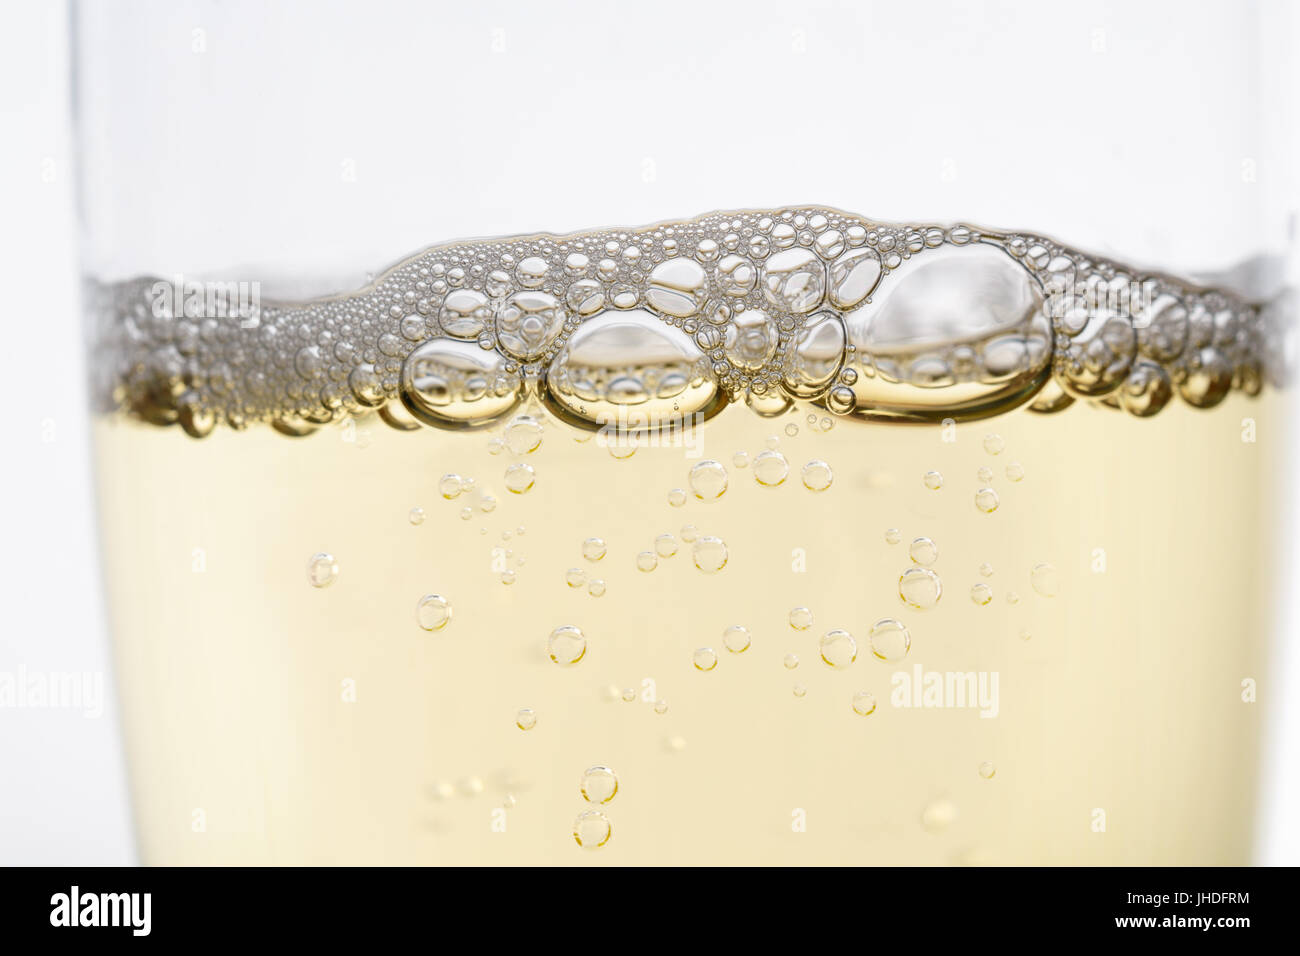 Close up (macro) of sparkling champagne flute style glass, wiith rising bubbles topped by layer of froth. Stock Photo